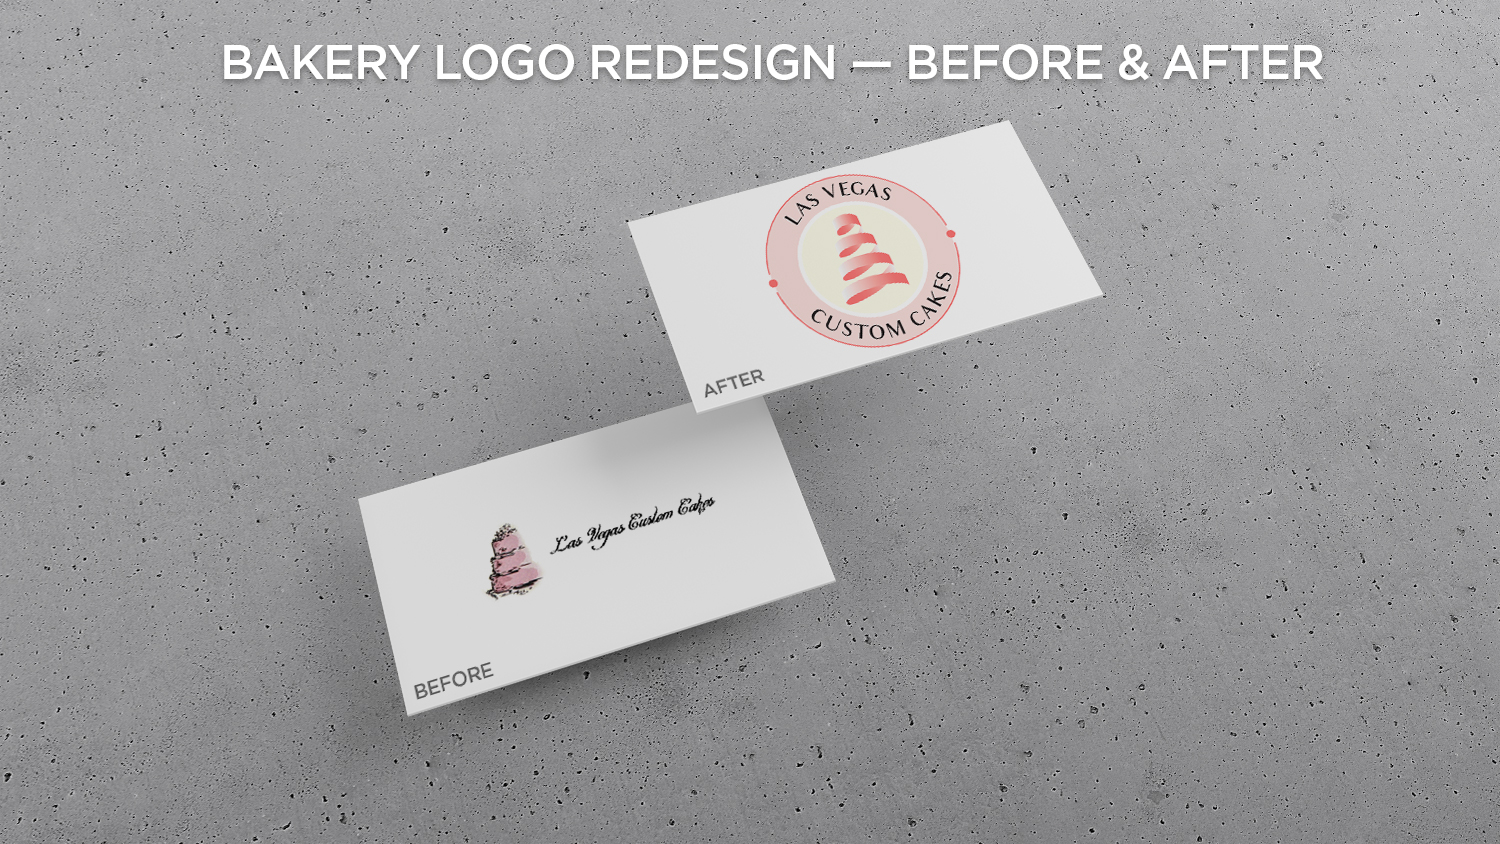 Las Vegas Custom Cakes logo design - image showing how it looked before and how it looks after redesign